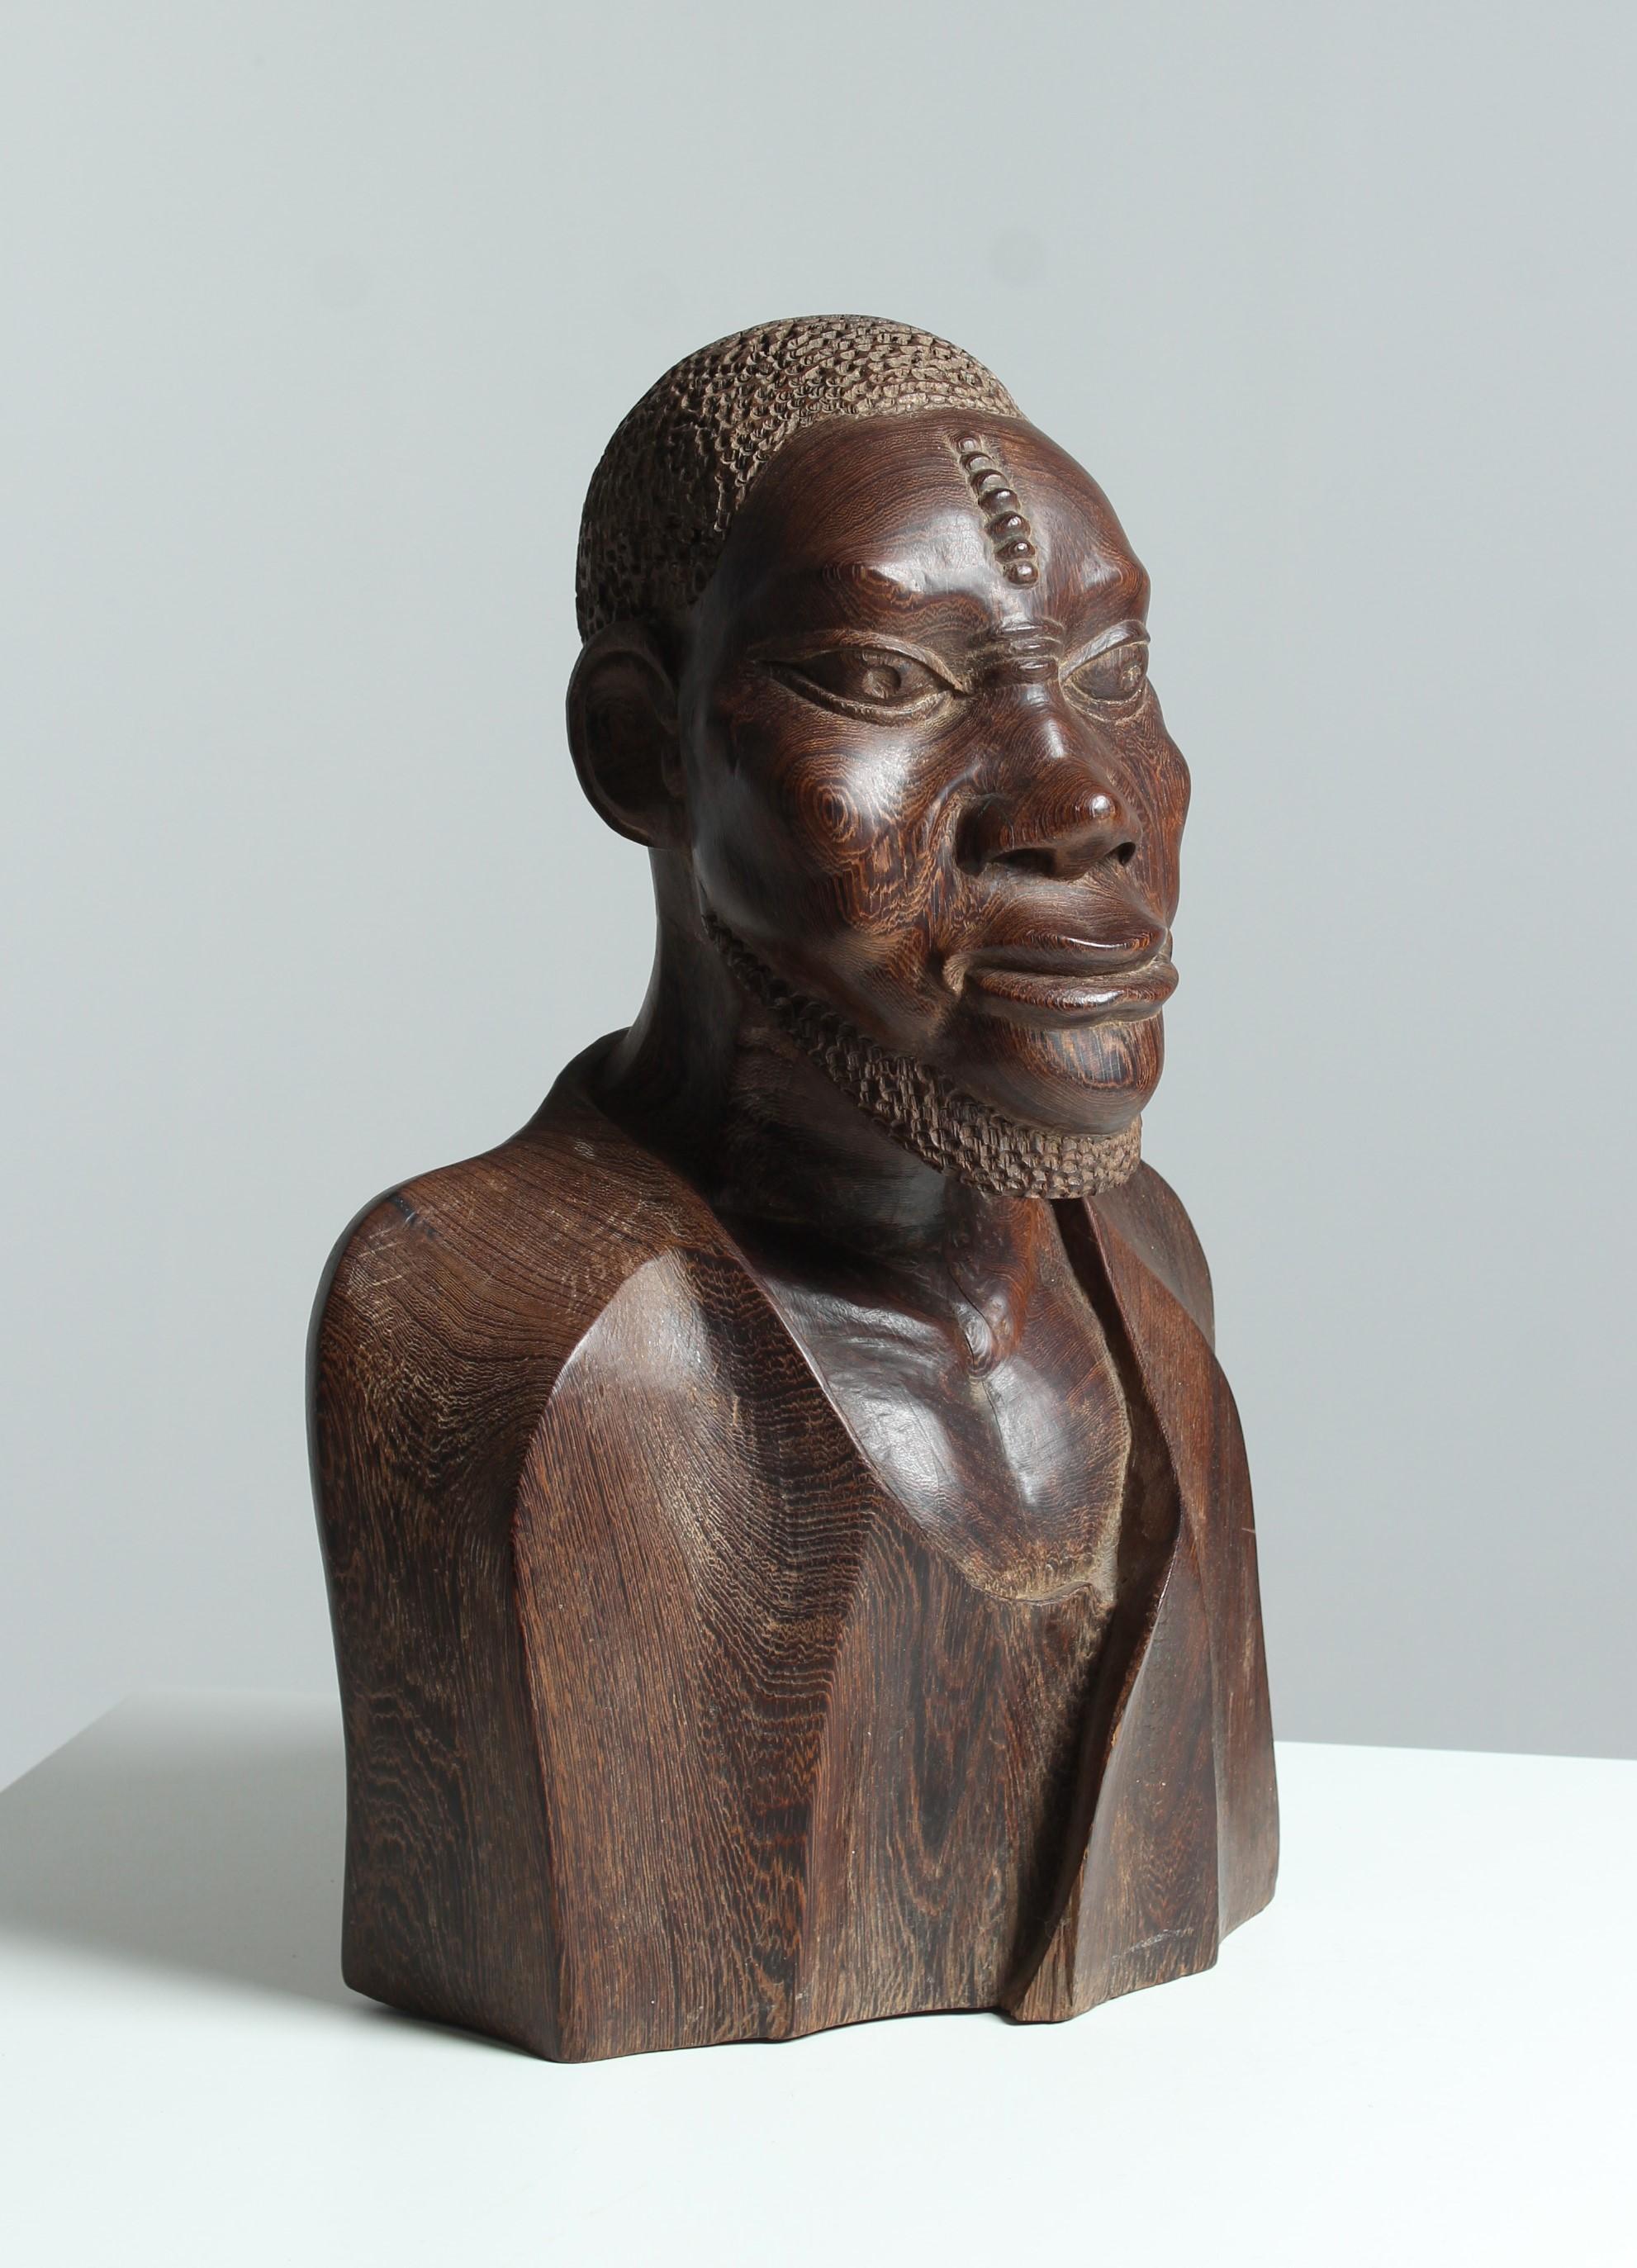 Exceptionally beautiful bust carved in the finest quality craftsmanship. Used is an extremely heavy and extremely hard wood. 

Presumably, the sculpture comes from the time when it came to an end with the French colonies. 
The figure is of an